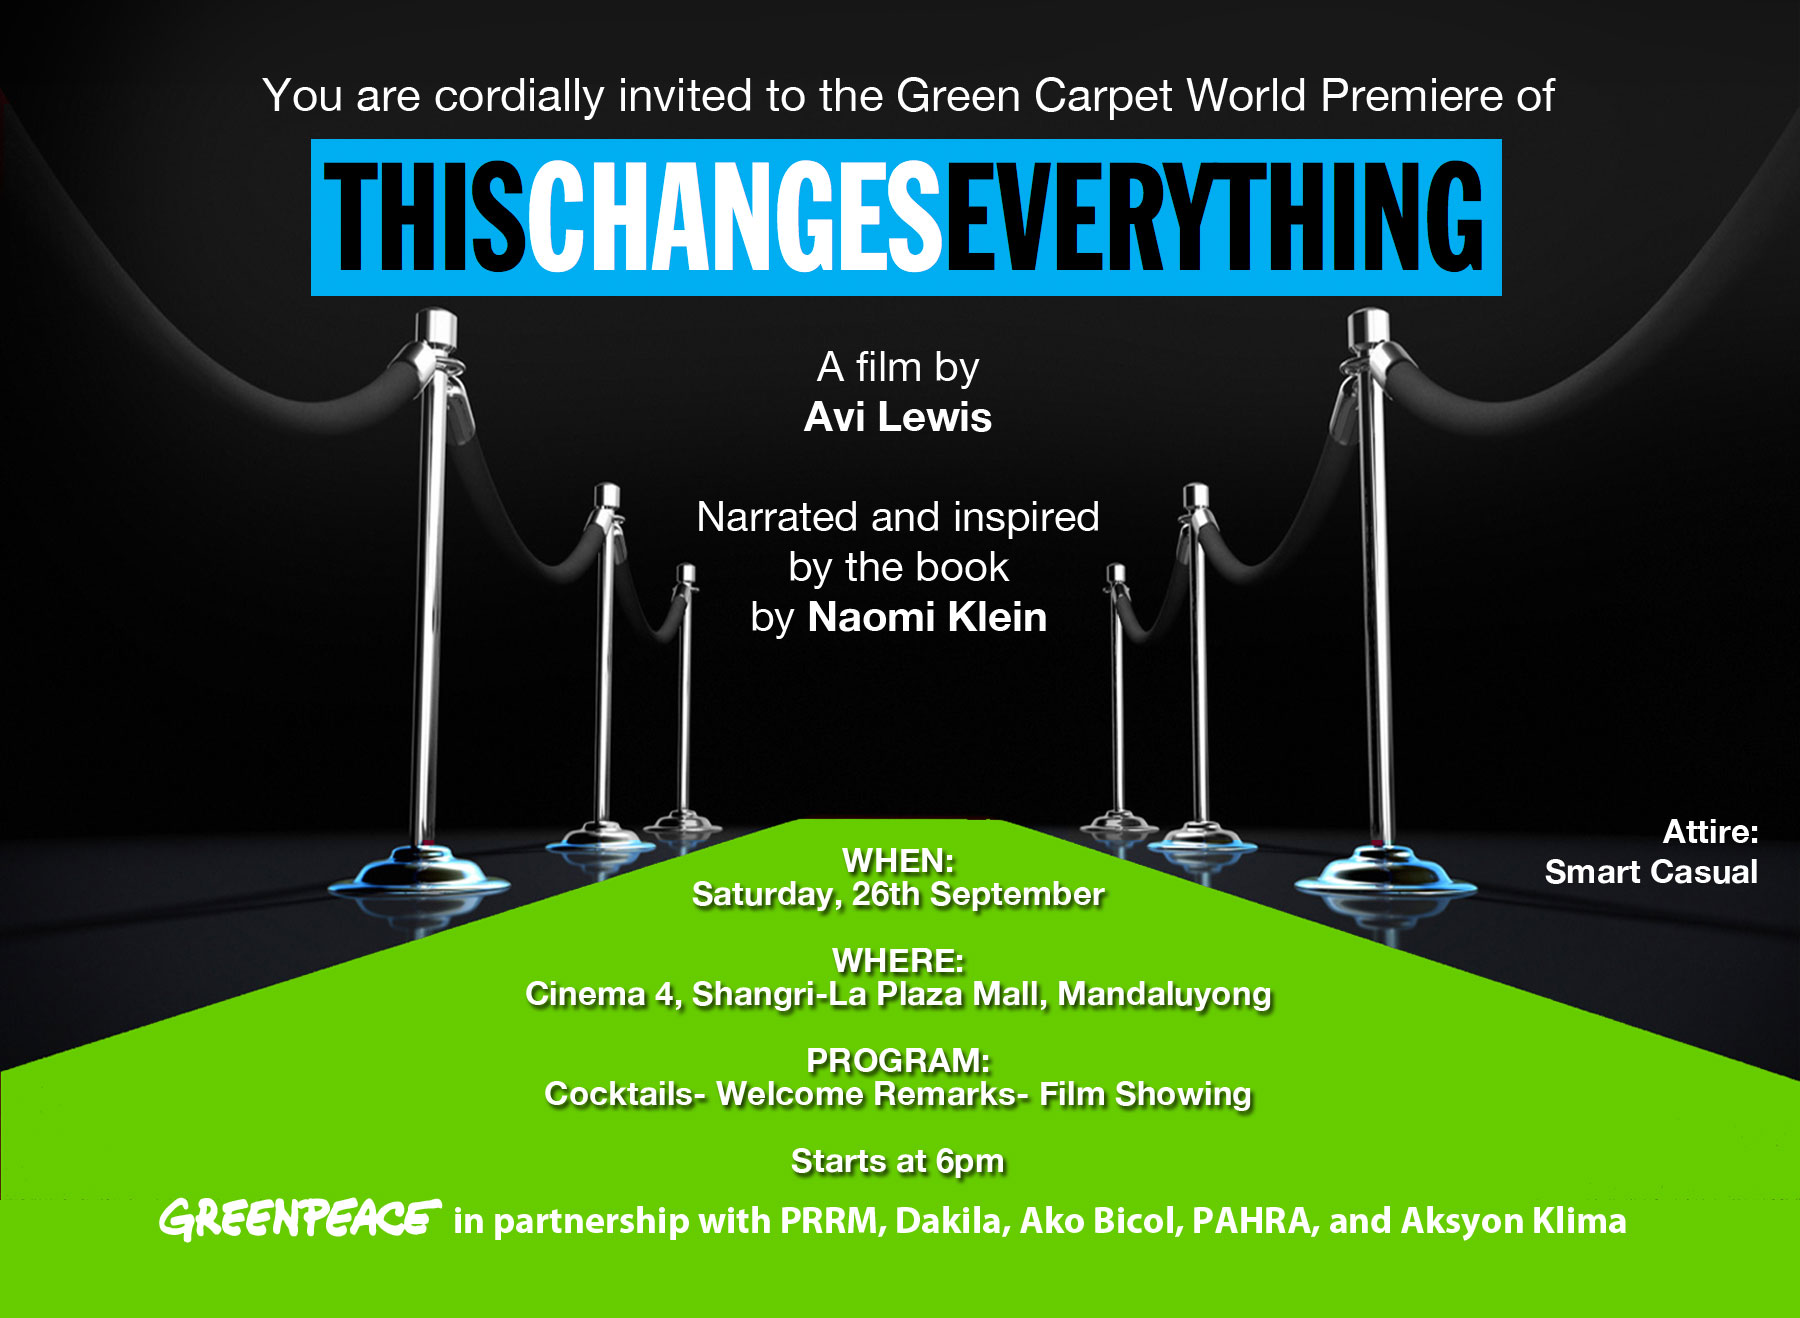 Film Screening: "This Changes Everything" World Premiere Saturday, September 26 at 6:00pm - 9:30pm Starts in about 3 hours · 88°F Scattered Clouds Show Map Cinema 4, Shang Cineplex, Shangrila Plaza Mall Mandaluyong Find Tickets Tickets Available www.eventbrite.com Greenpeace Philippines, in partnership with PRRM, PAHRA, Aksyon Klima, Ako Bicol, and Dakila, hosts the ‘Green Carpet’ screening of the film "This Changes Everything”, inspired by the best-selling book by Naomi Klein. This is part of Greenpeace Philippines’ Climate Justice campaign which seeks climate accountability from big carbon polluters that are responsible for climate change. This event is by invitation only.